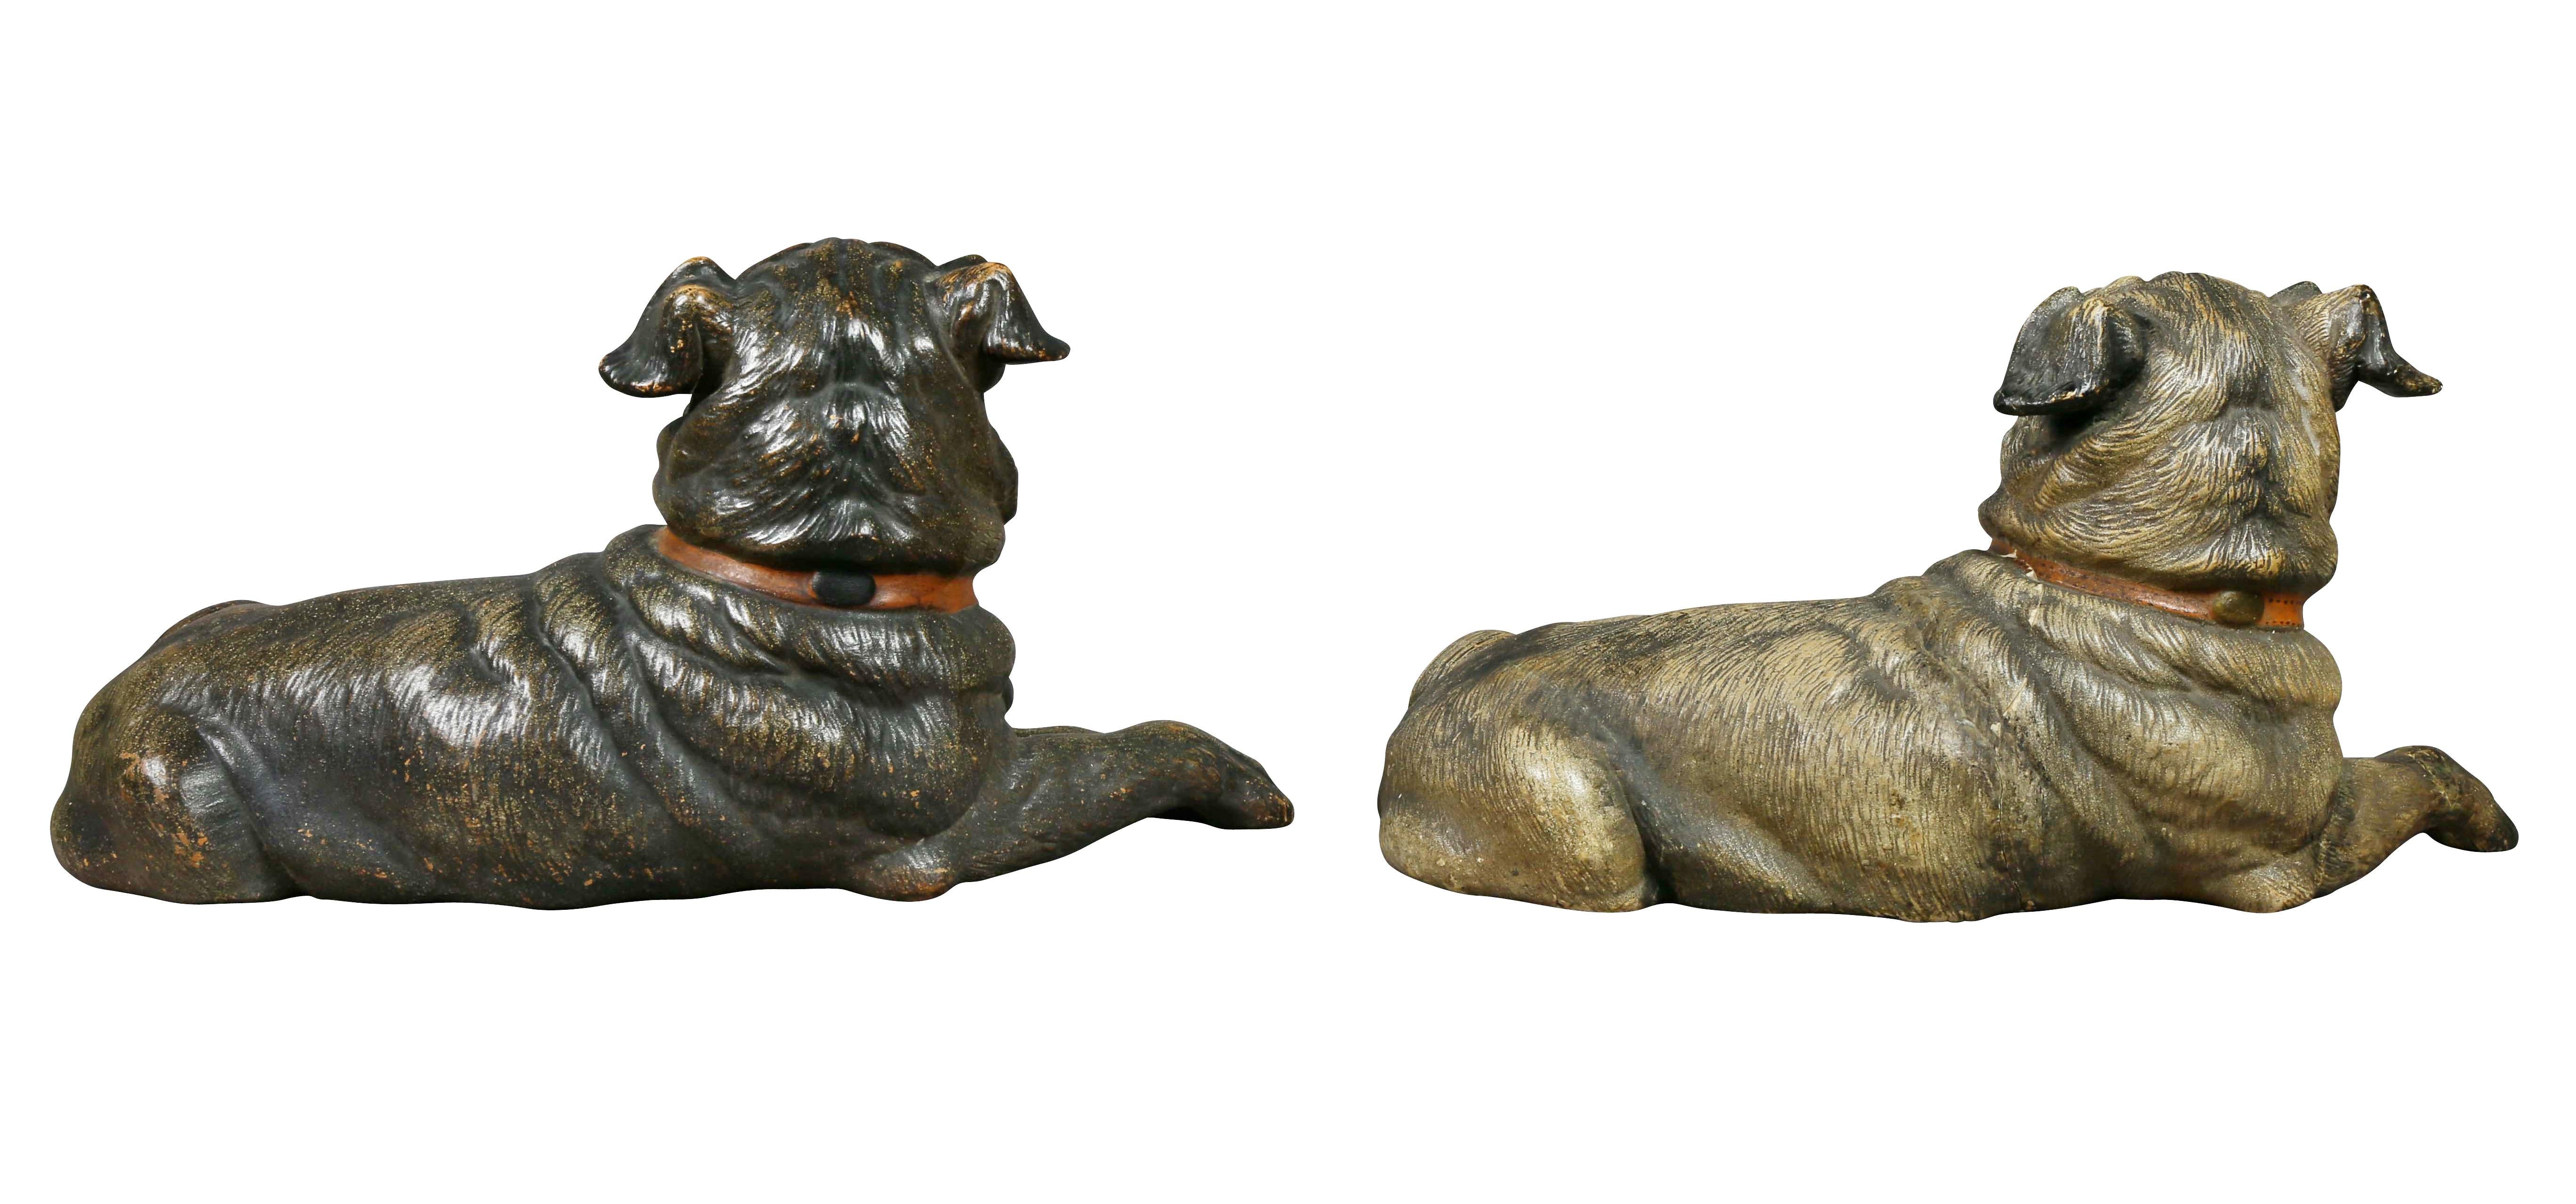 Other Two Terracotta Figures of Reclining Pug Dogs